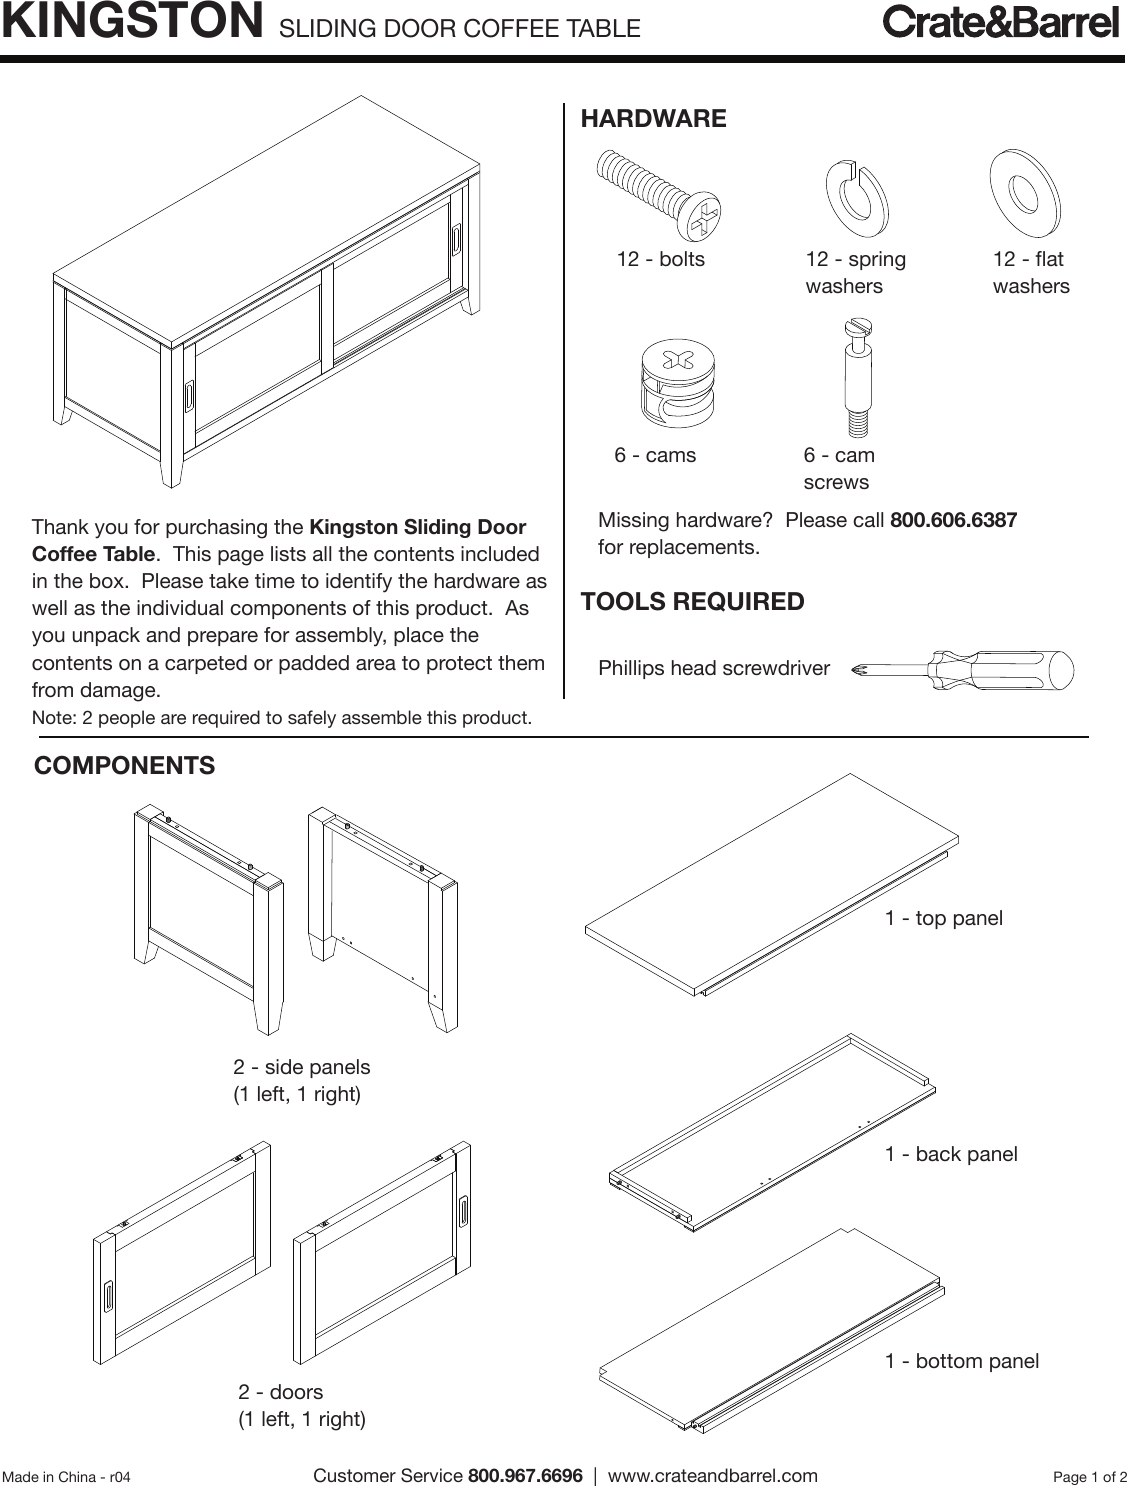 Page 1 of 2 - Crate-Barrel 570-Kingston-Sliding-Door-Coffee-Table Kingston Sliding Door Coffee Table Assembly Instructions From Crate And Barrel